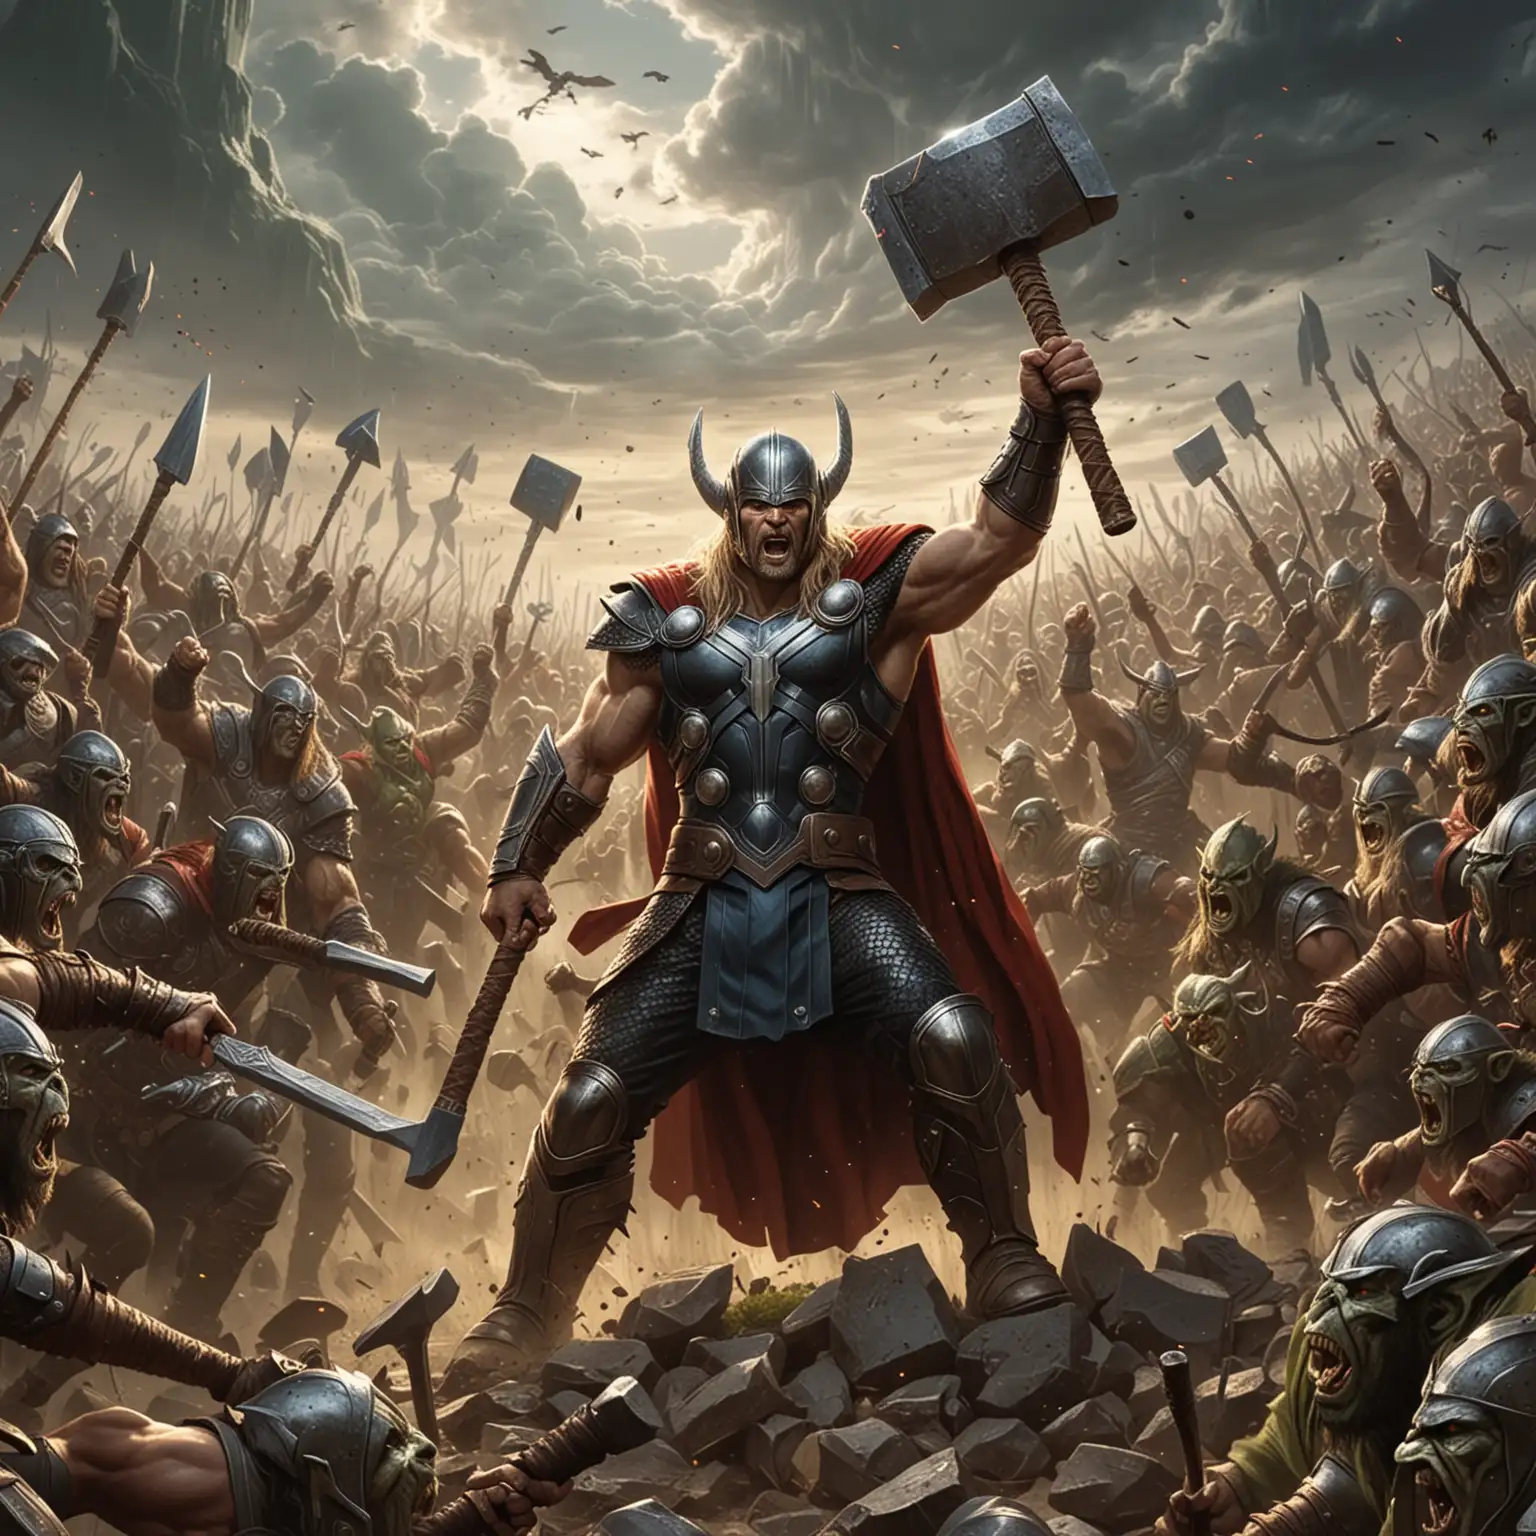 Valiant Norse God Thor in Armor Battle with Orc Horde